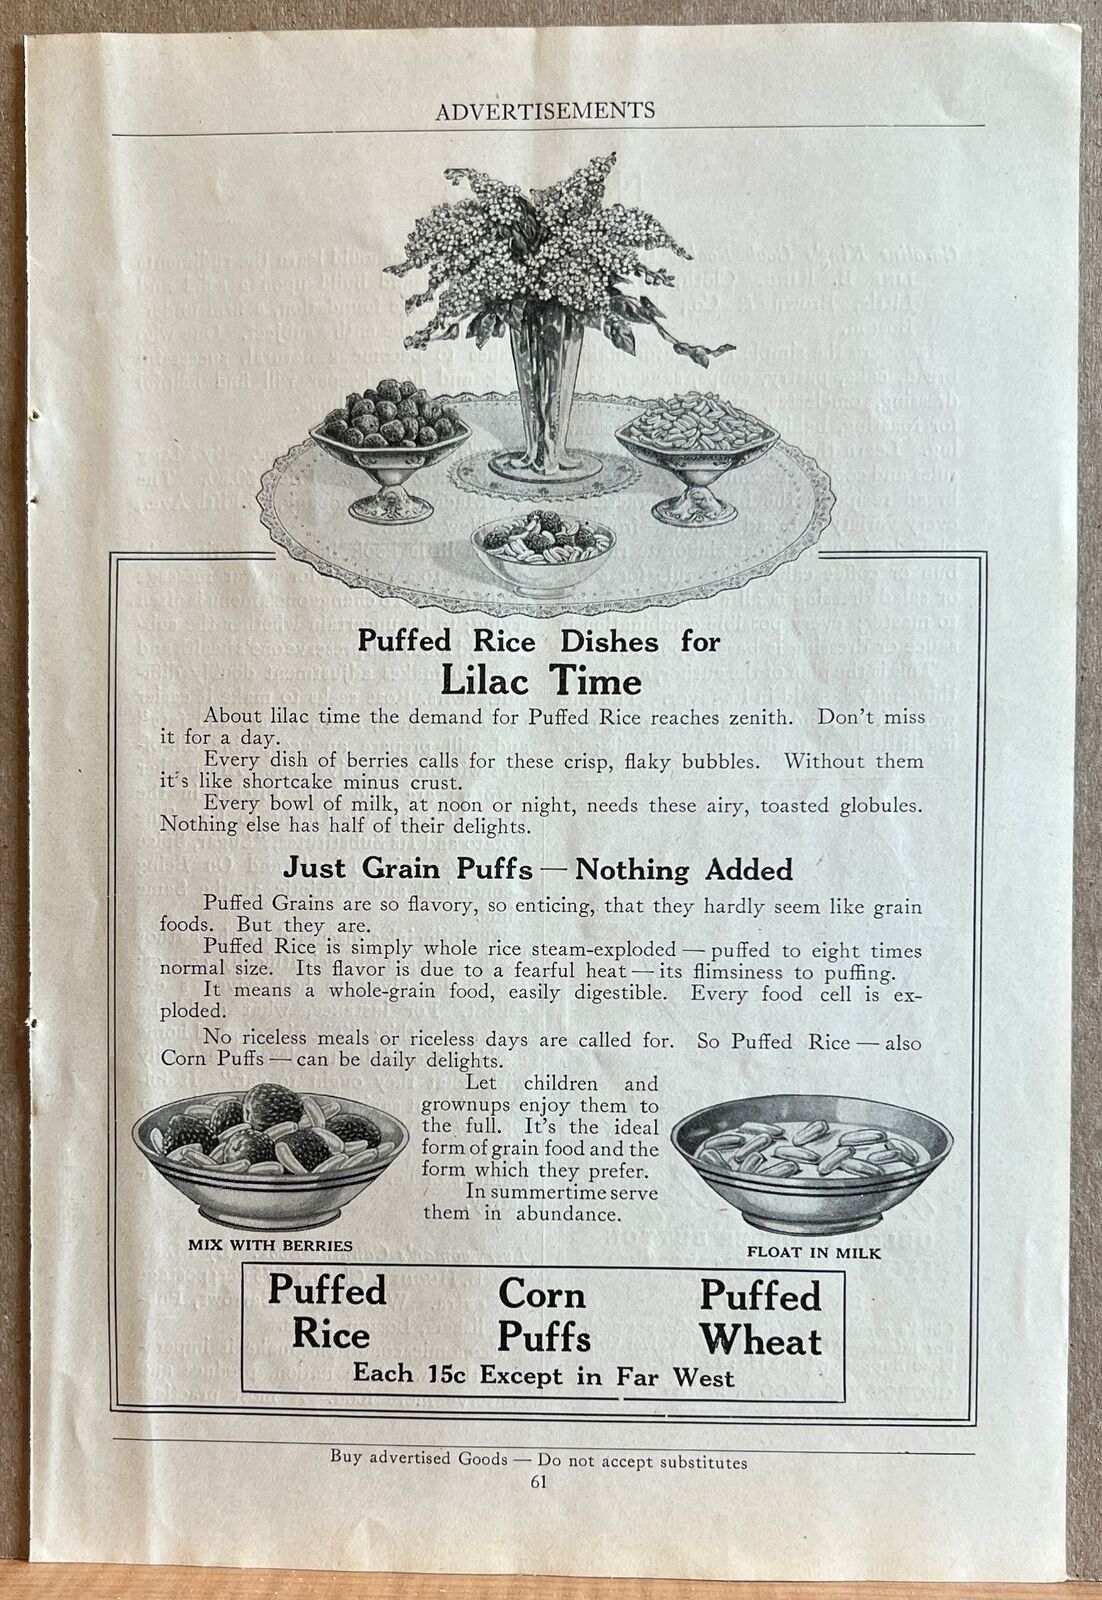 1918 Puffed Rice Quaker Oats Co Print Ad Puffed Rice Dishes For Lilac Time